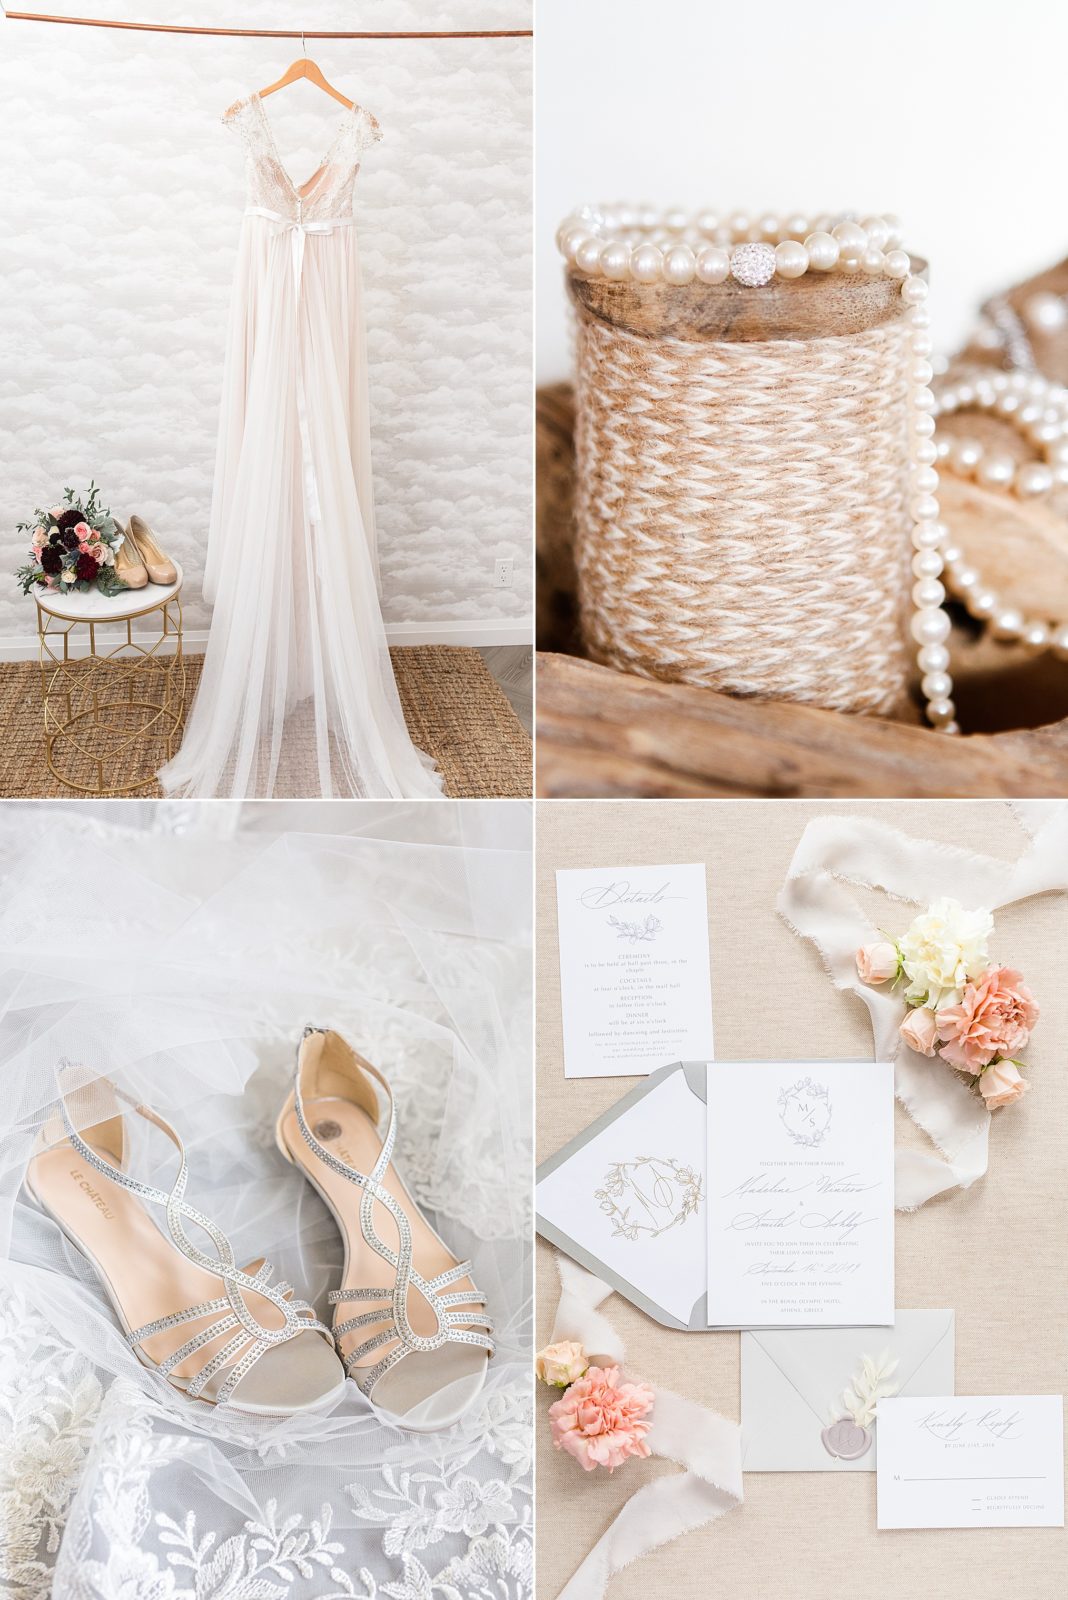 wedding invitation suite examples and bridal details